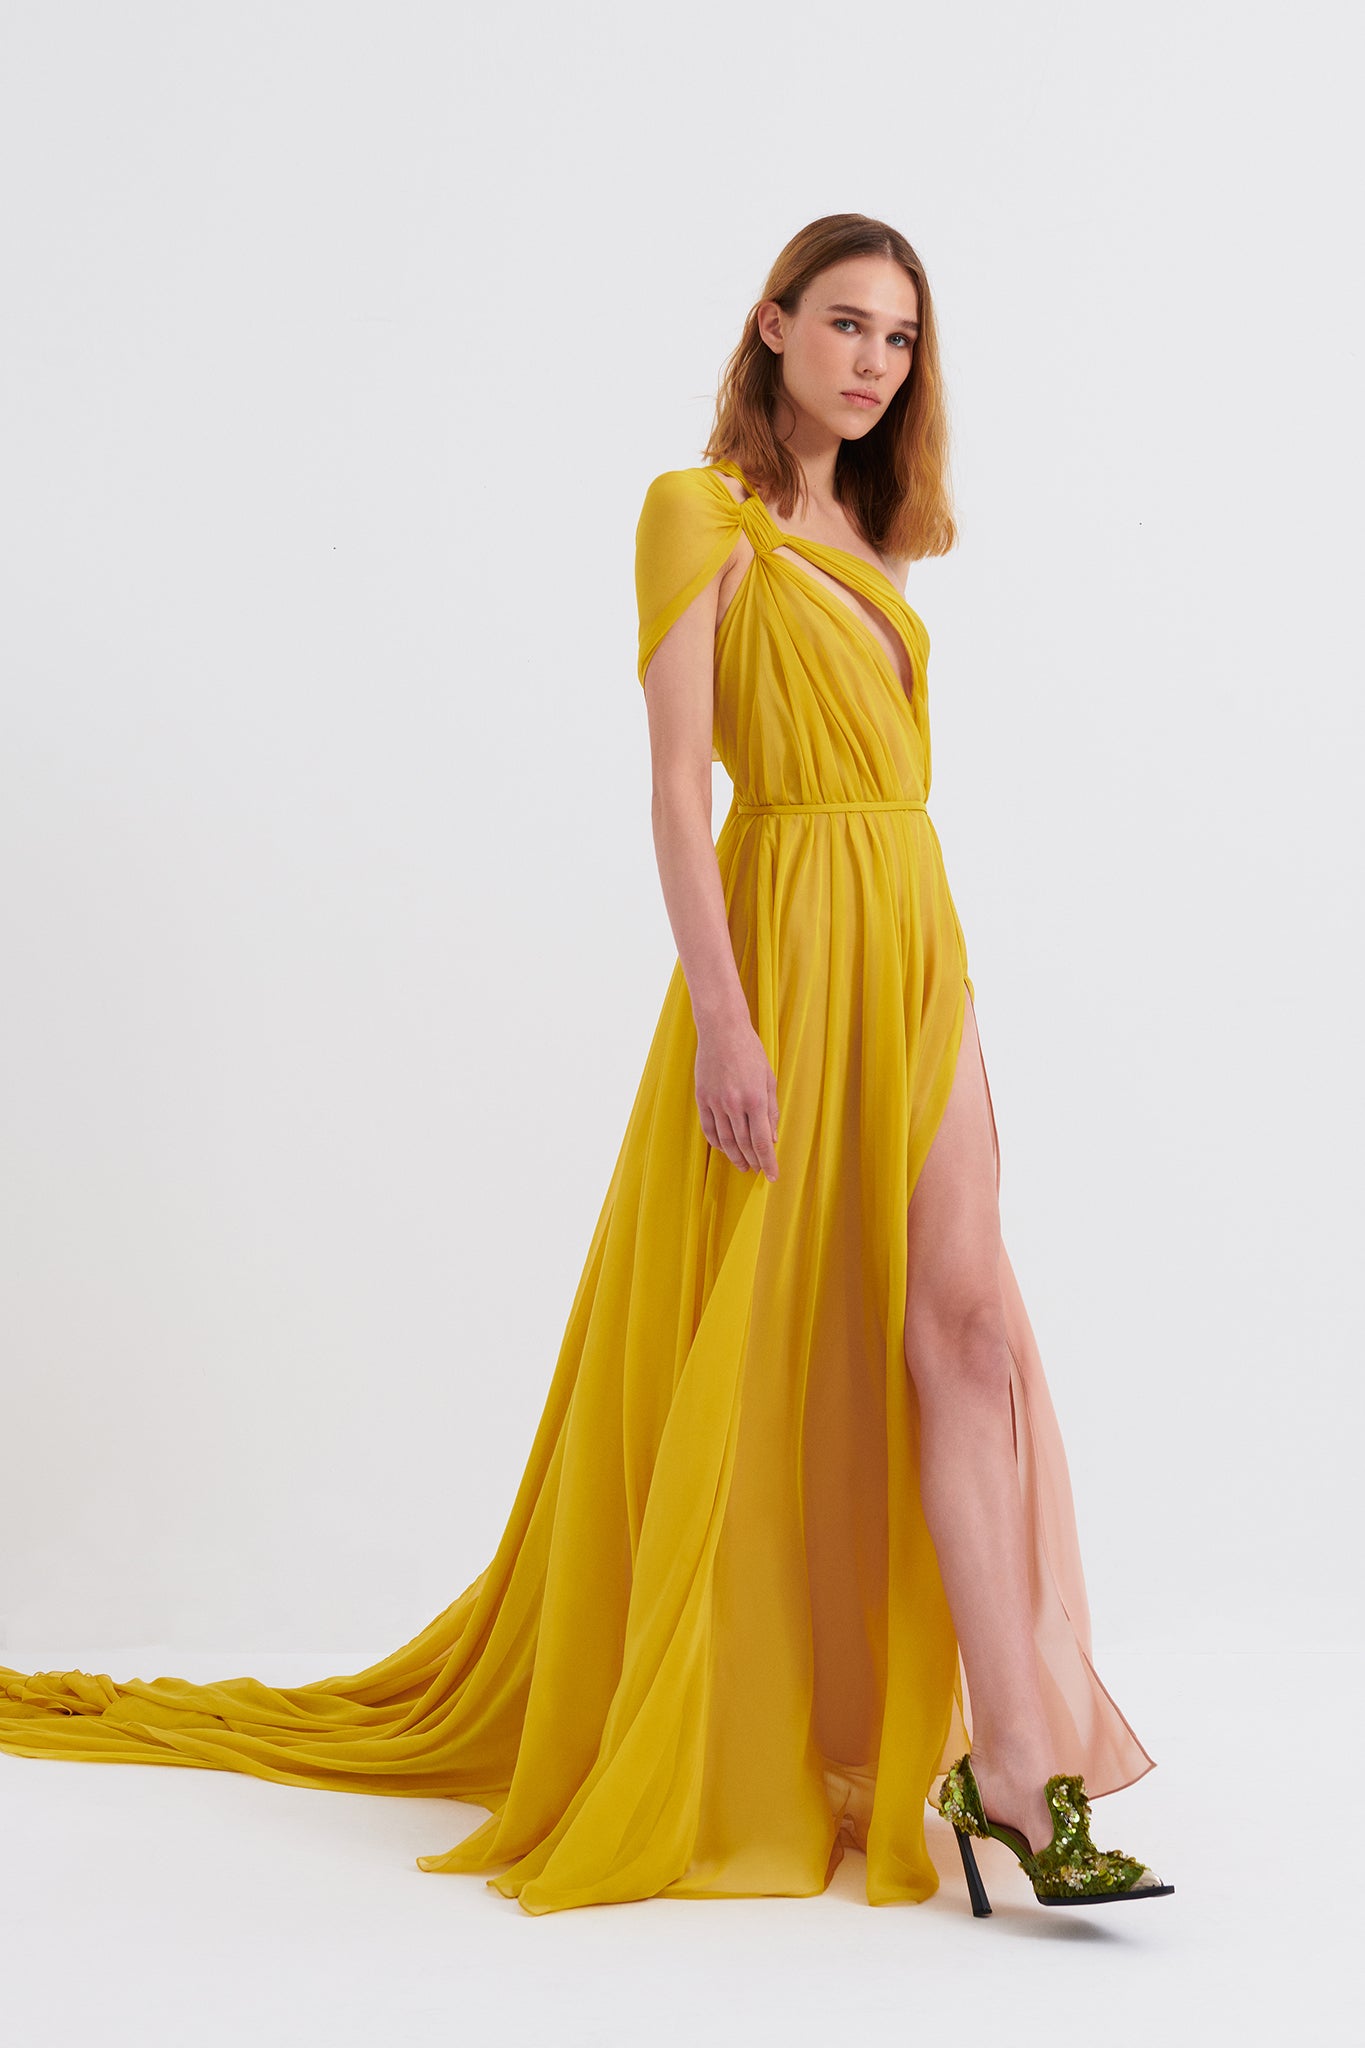 Draped One-Shoulder Gown